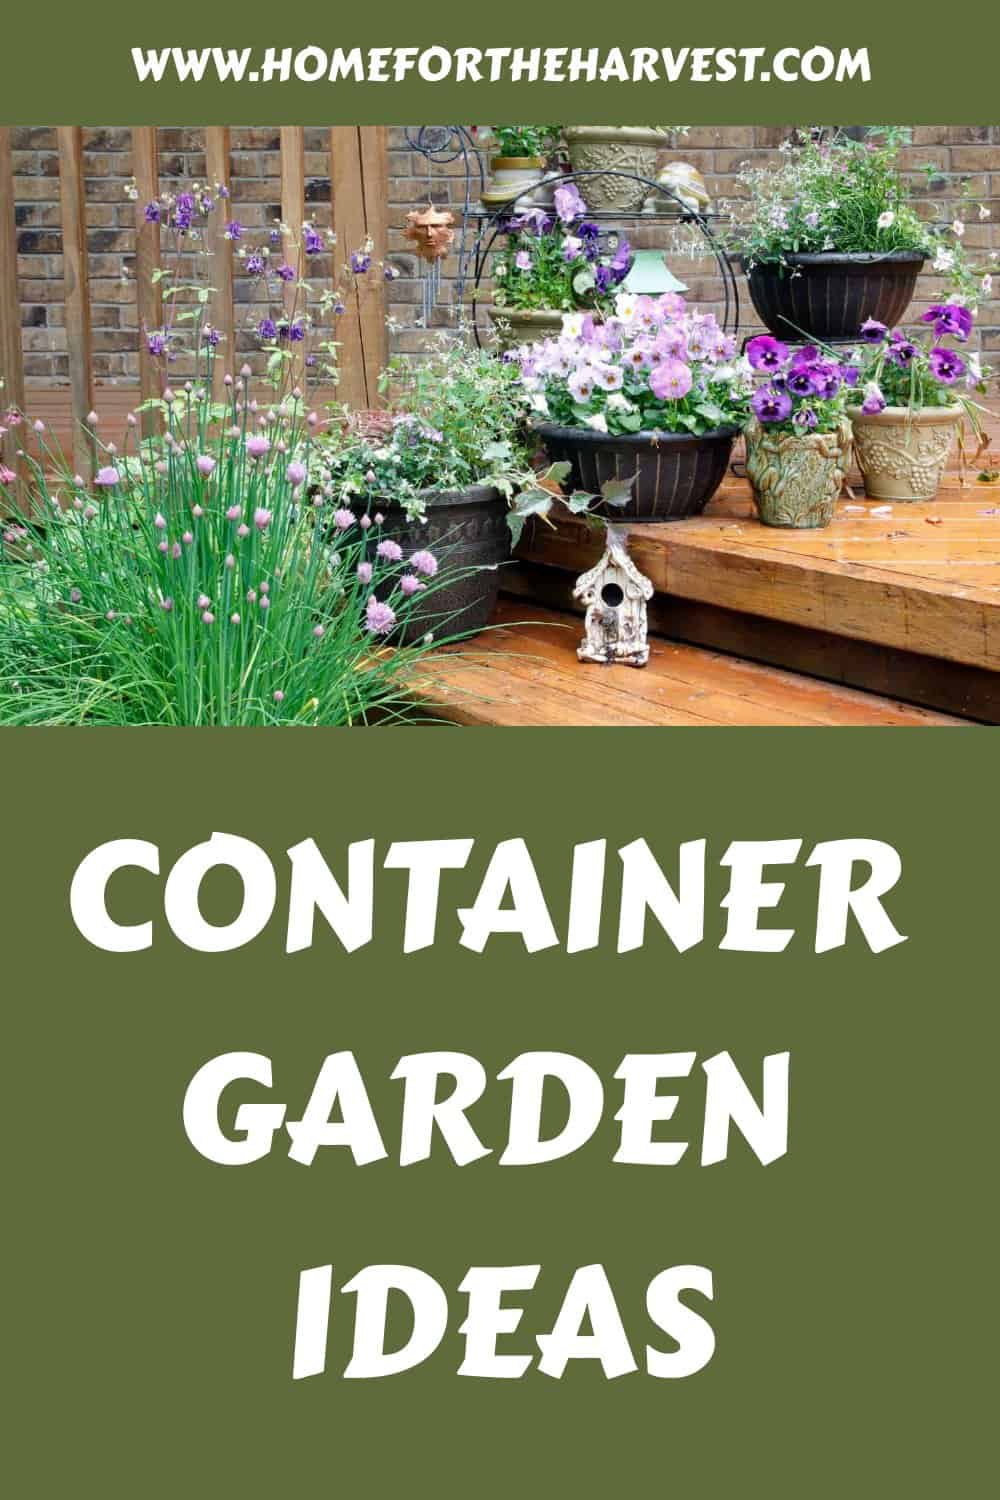 Container garden ideas generated pin 53808